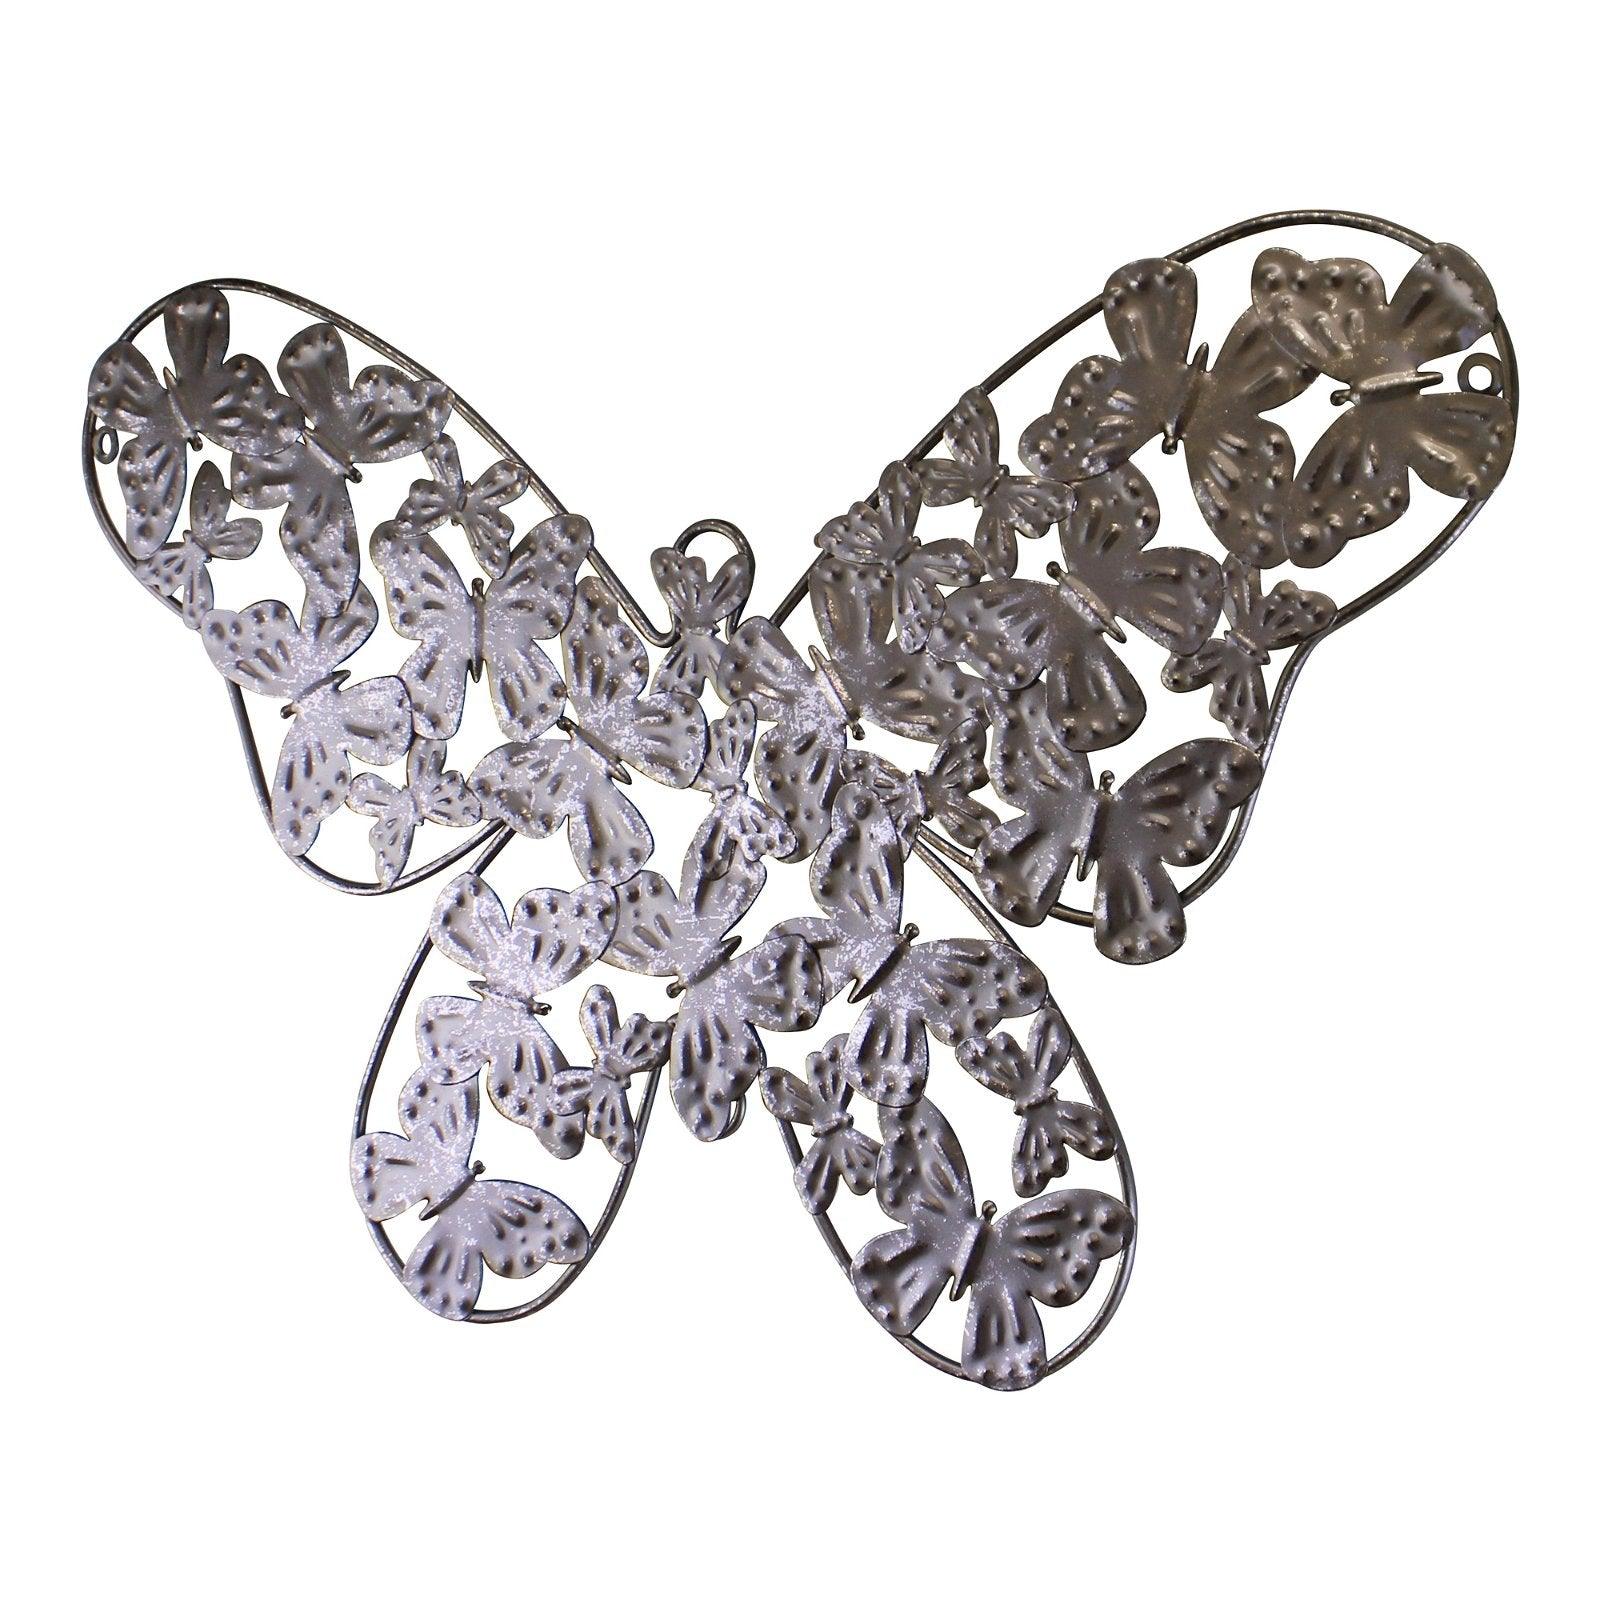 View Small Silver Metal Butterfly Design Wall Decor information